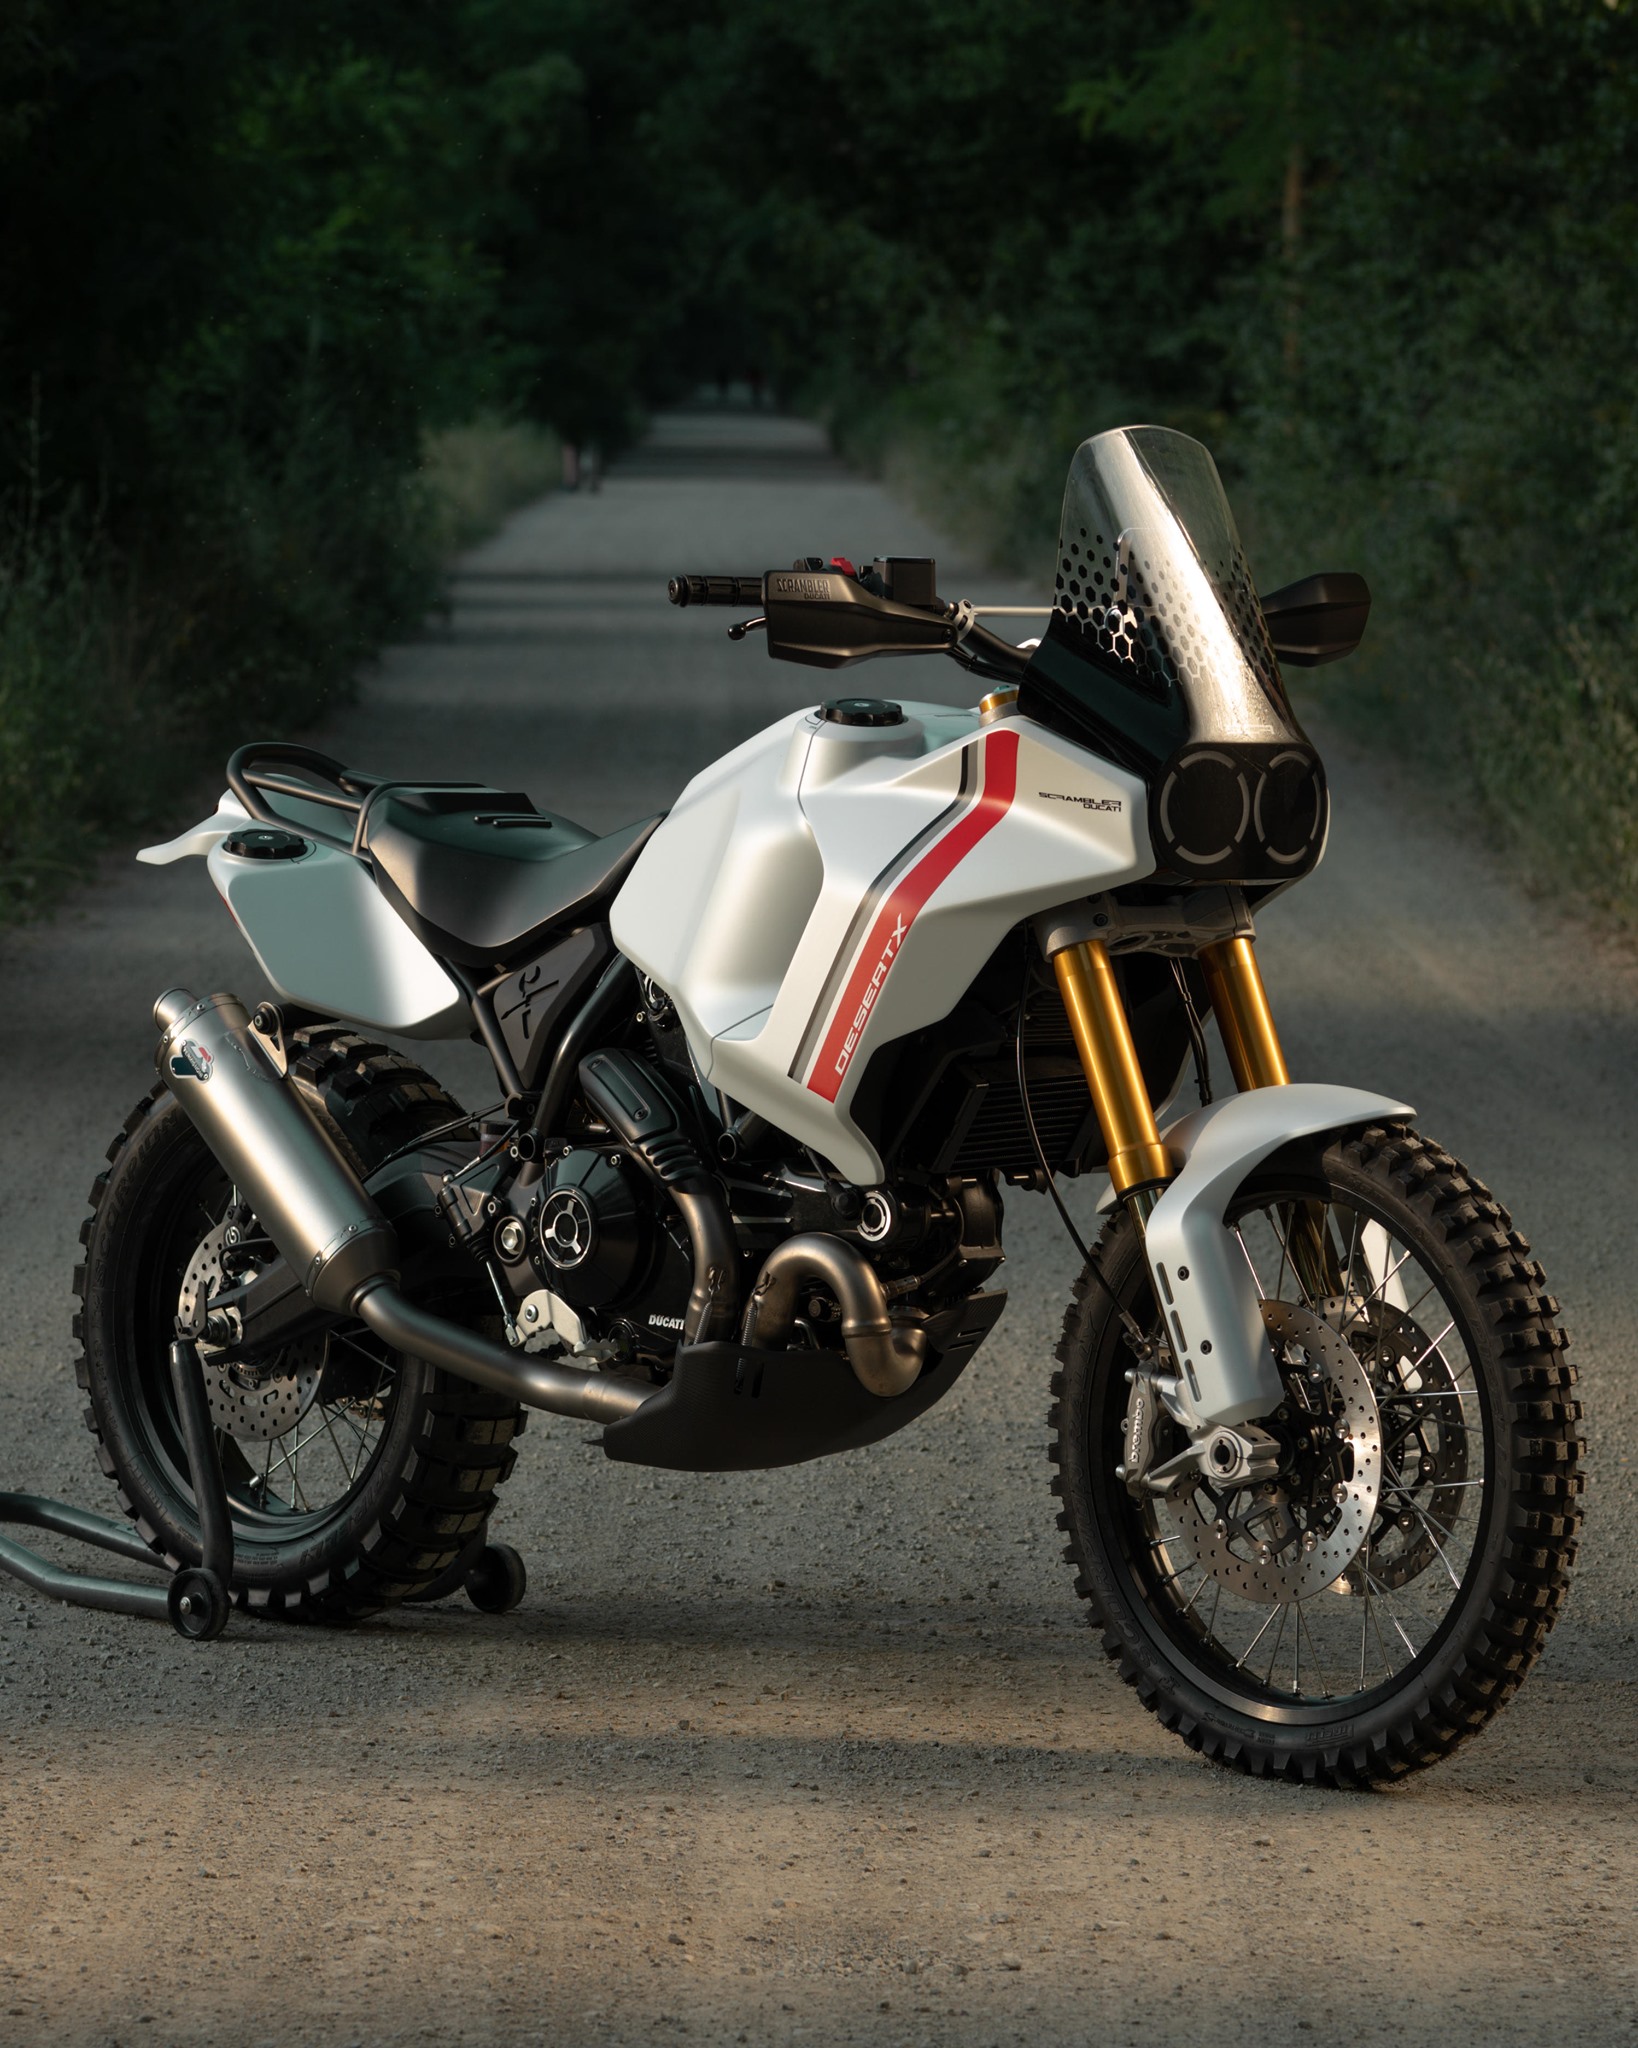 Ducati’s new enduro, the Desert X, may arrive by 2021 end - Adrenaline